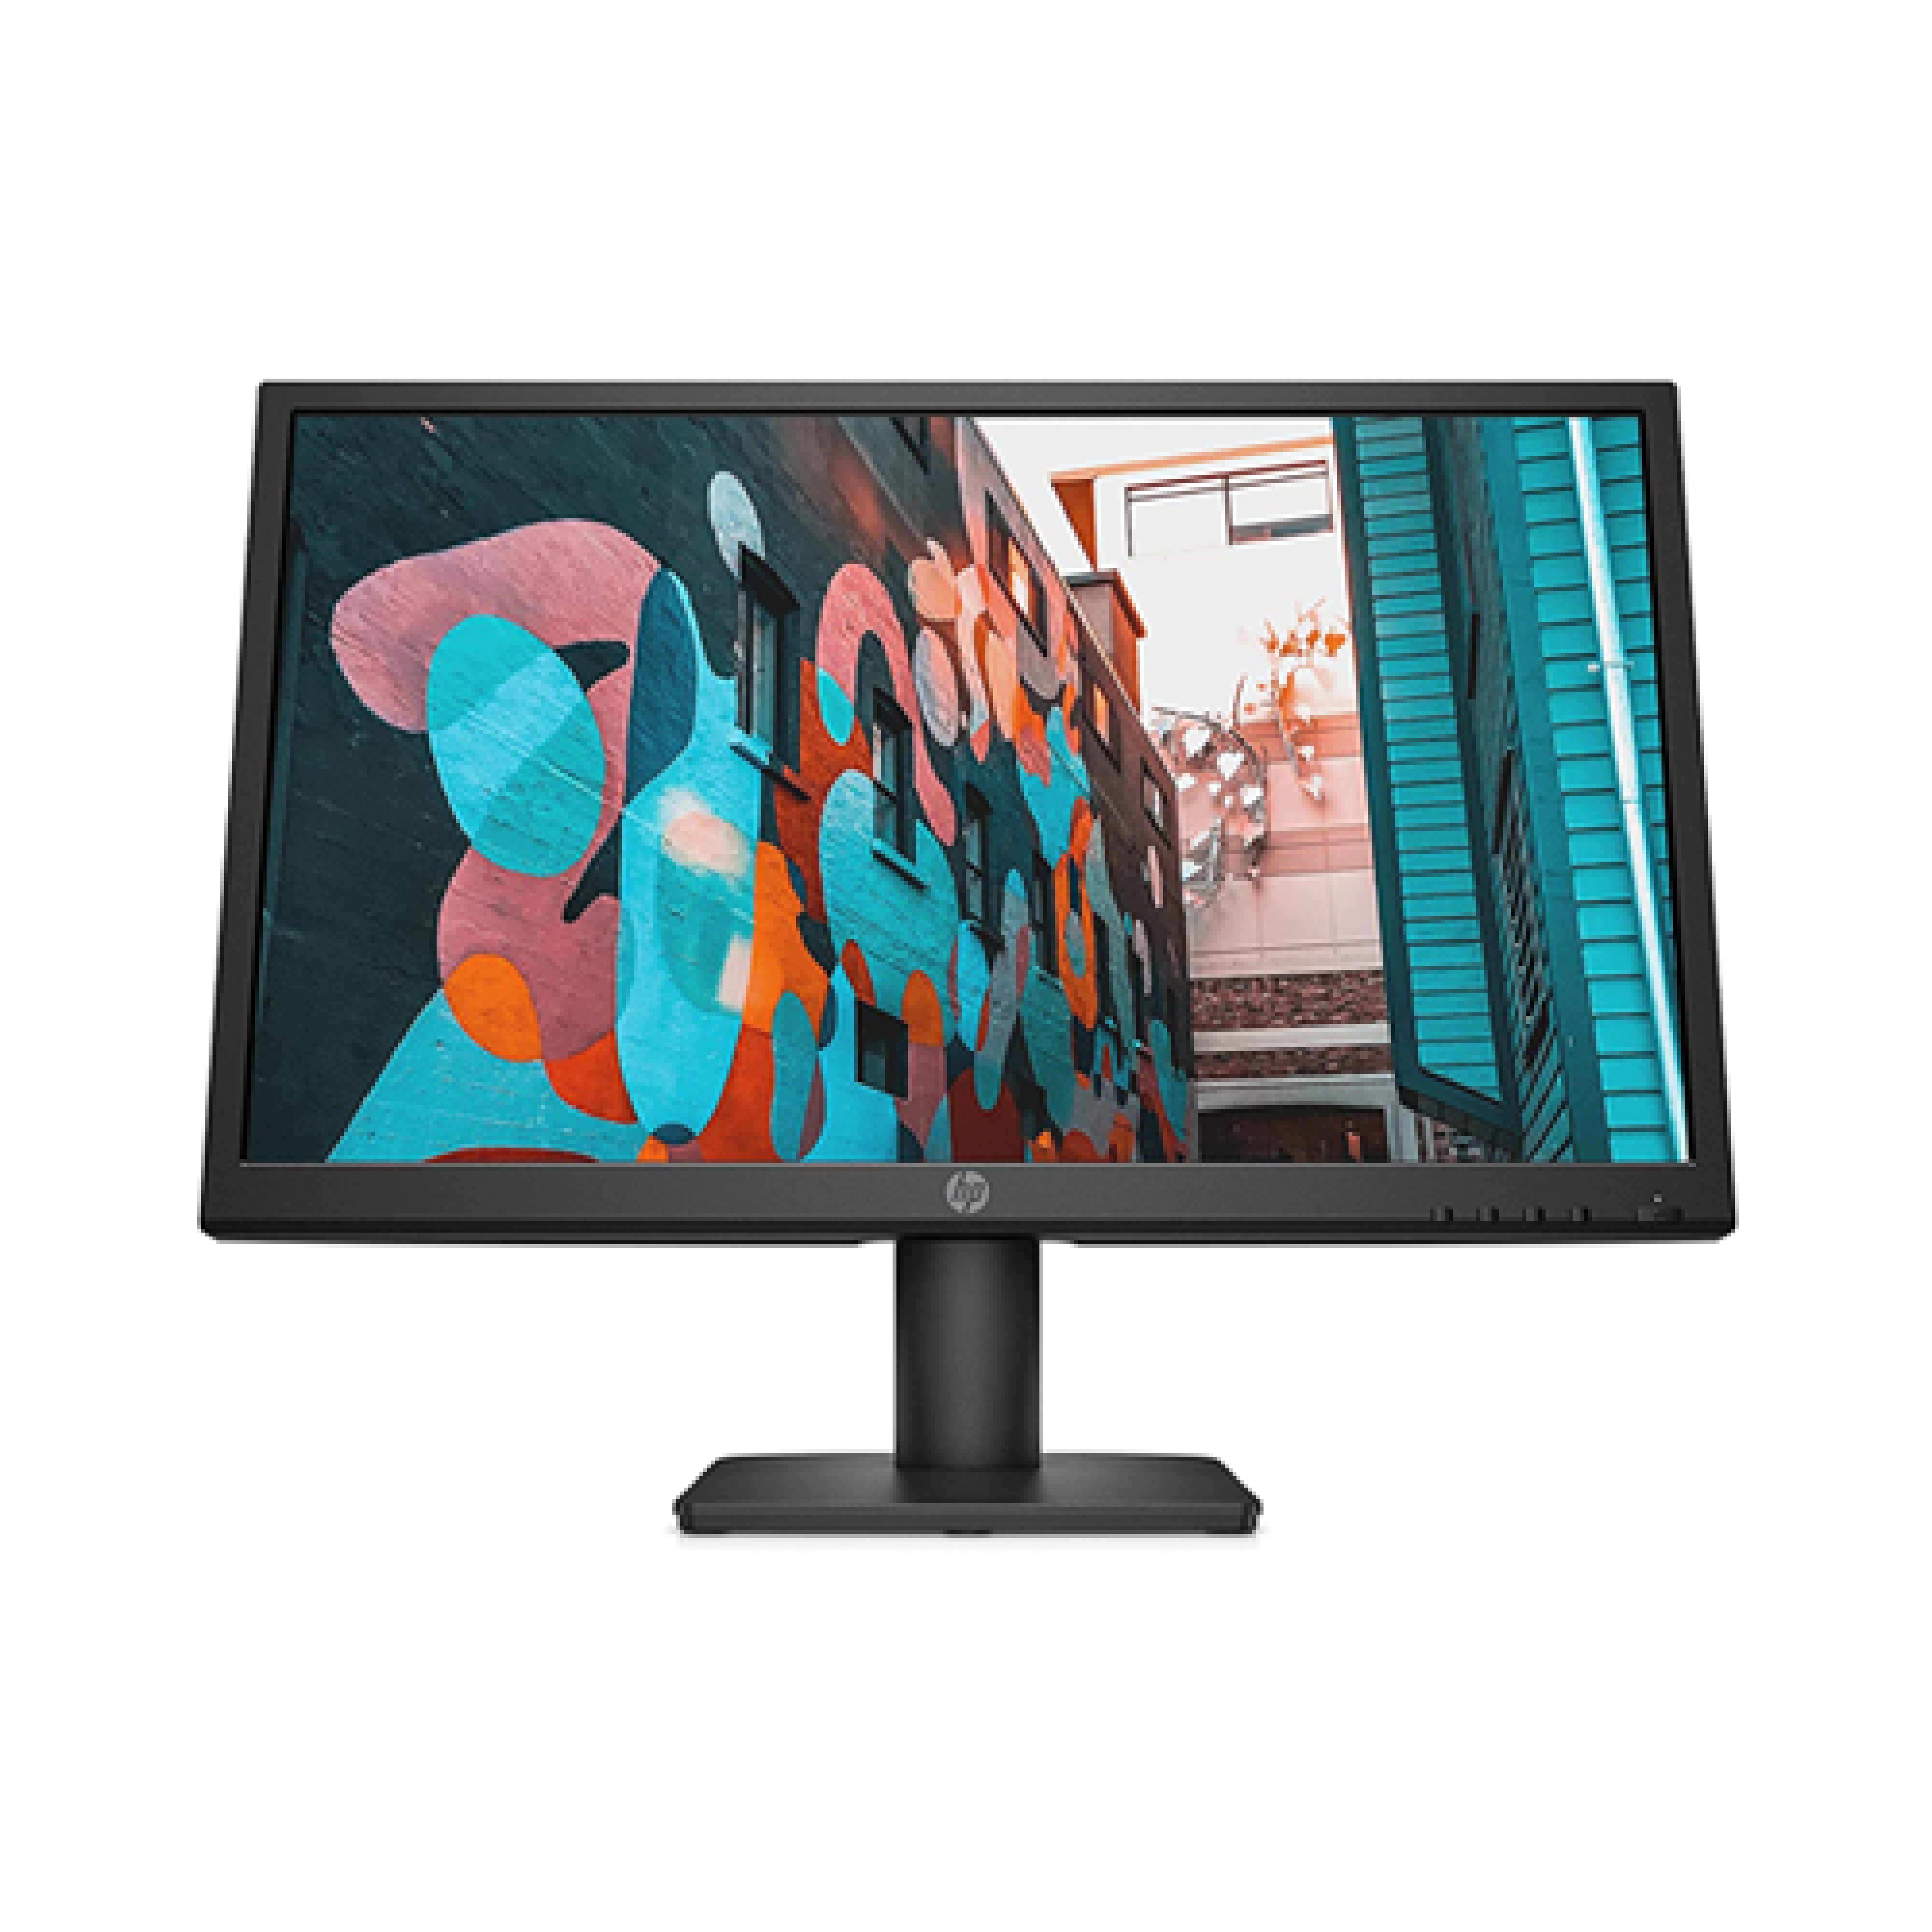 Best 22 inch Monitor for home office